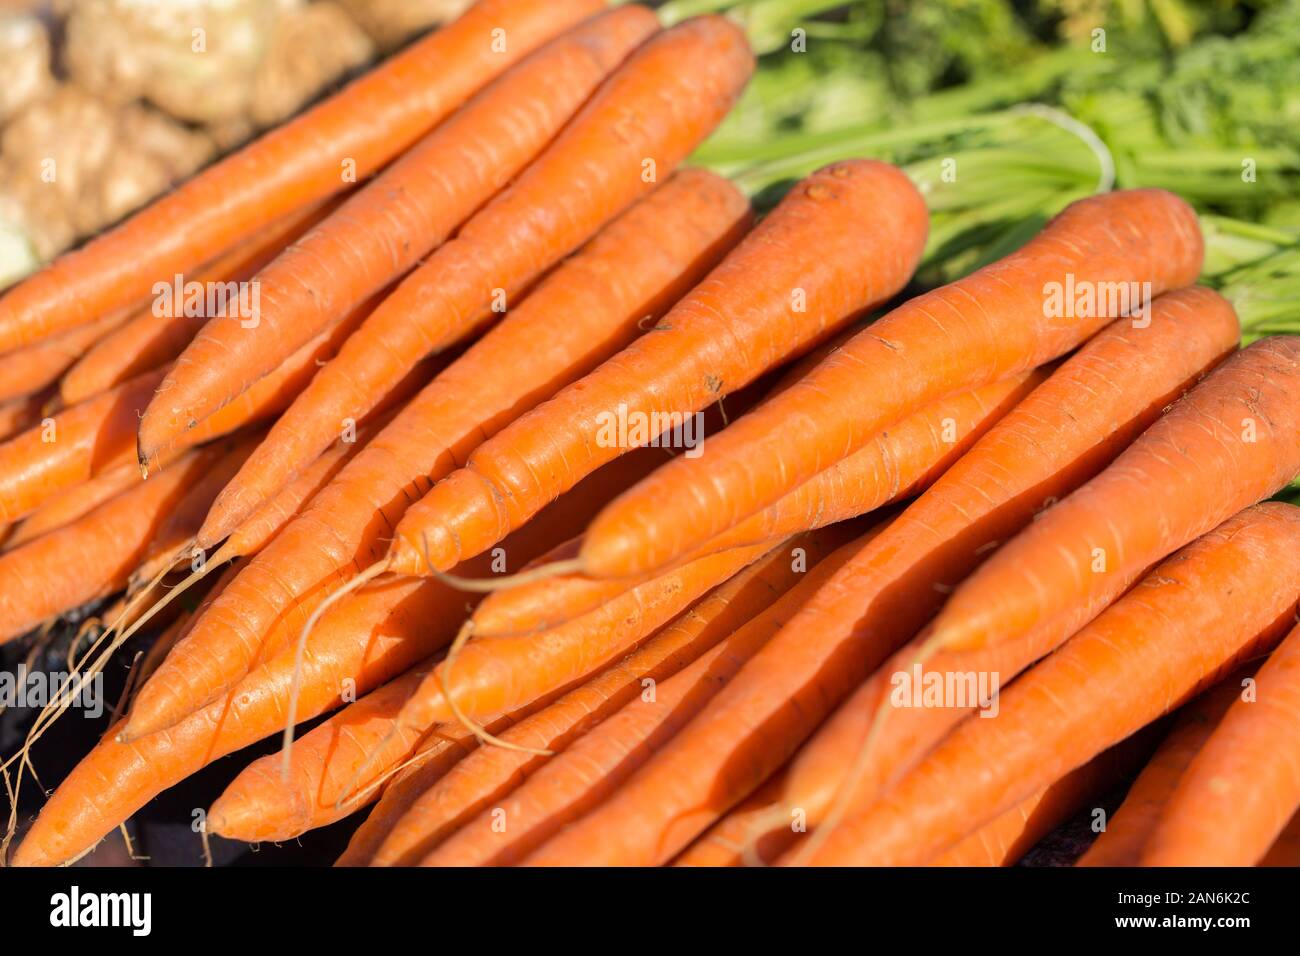 Close up of a bunch of fresh, orange carrots - on display for sale at a farmers market. Stock Photo